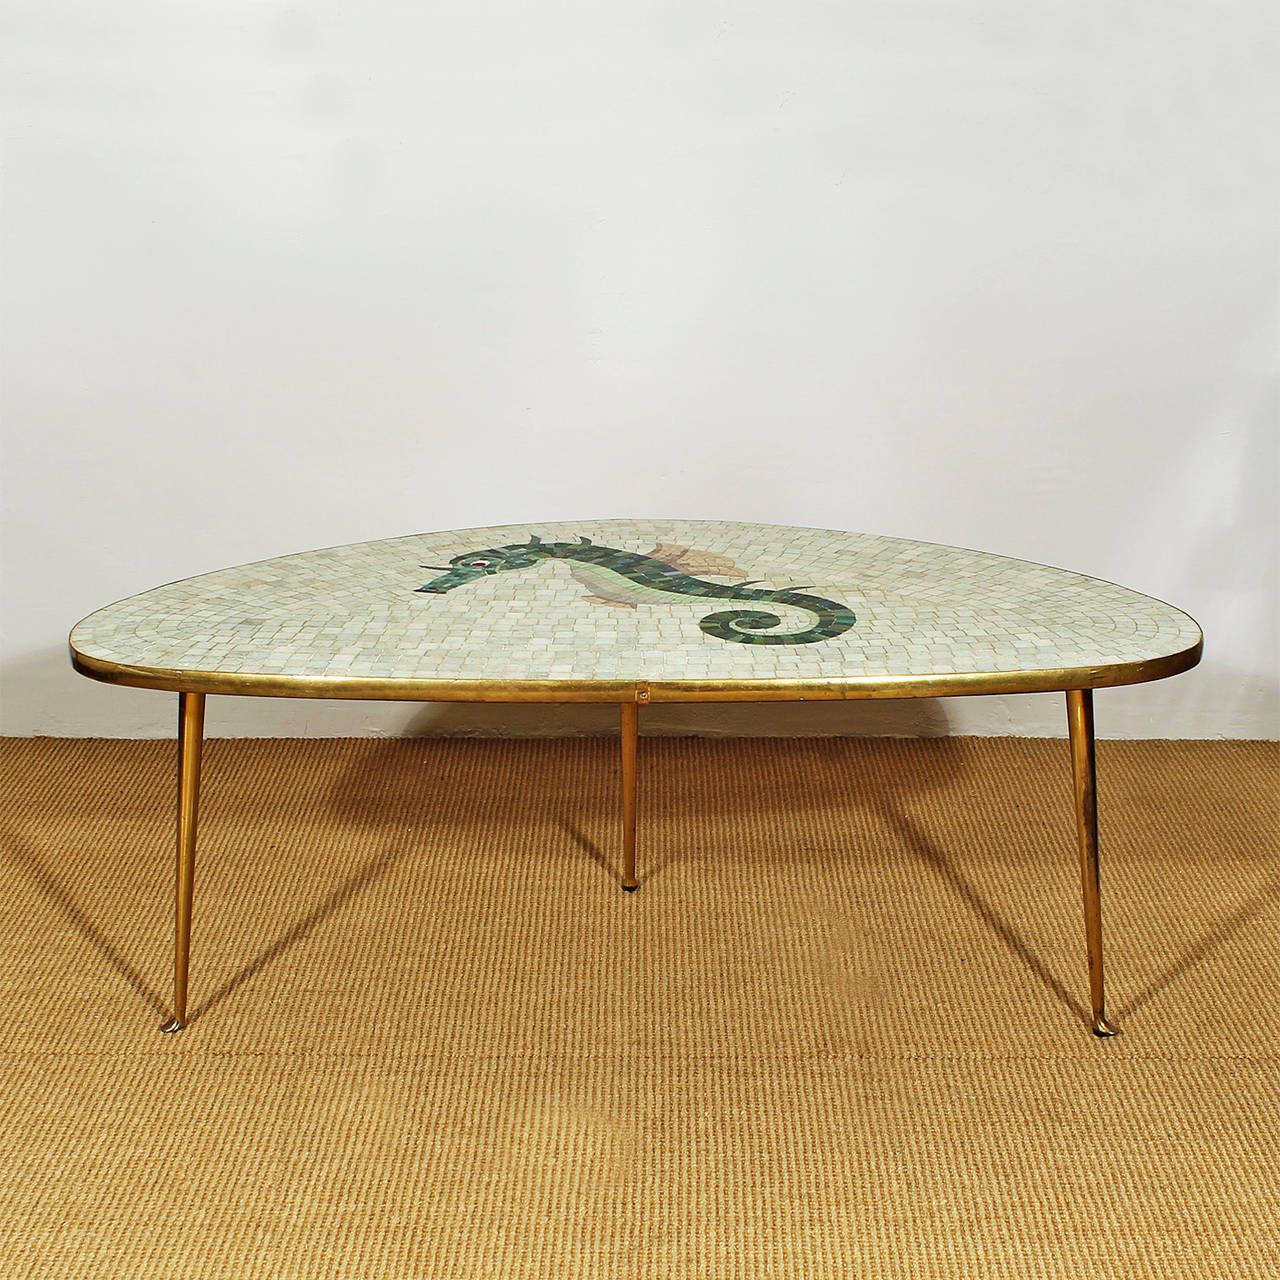 Nice tripod coffee table, ceramic mosaic on top with sea horse pattern, bright colours, brass feet and frame.
Italy c. 1950